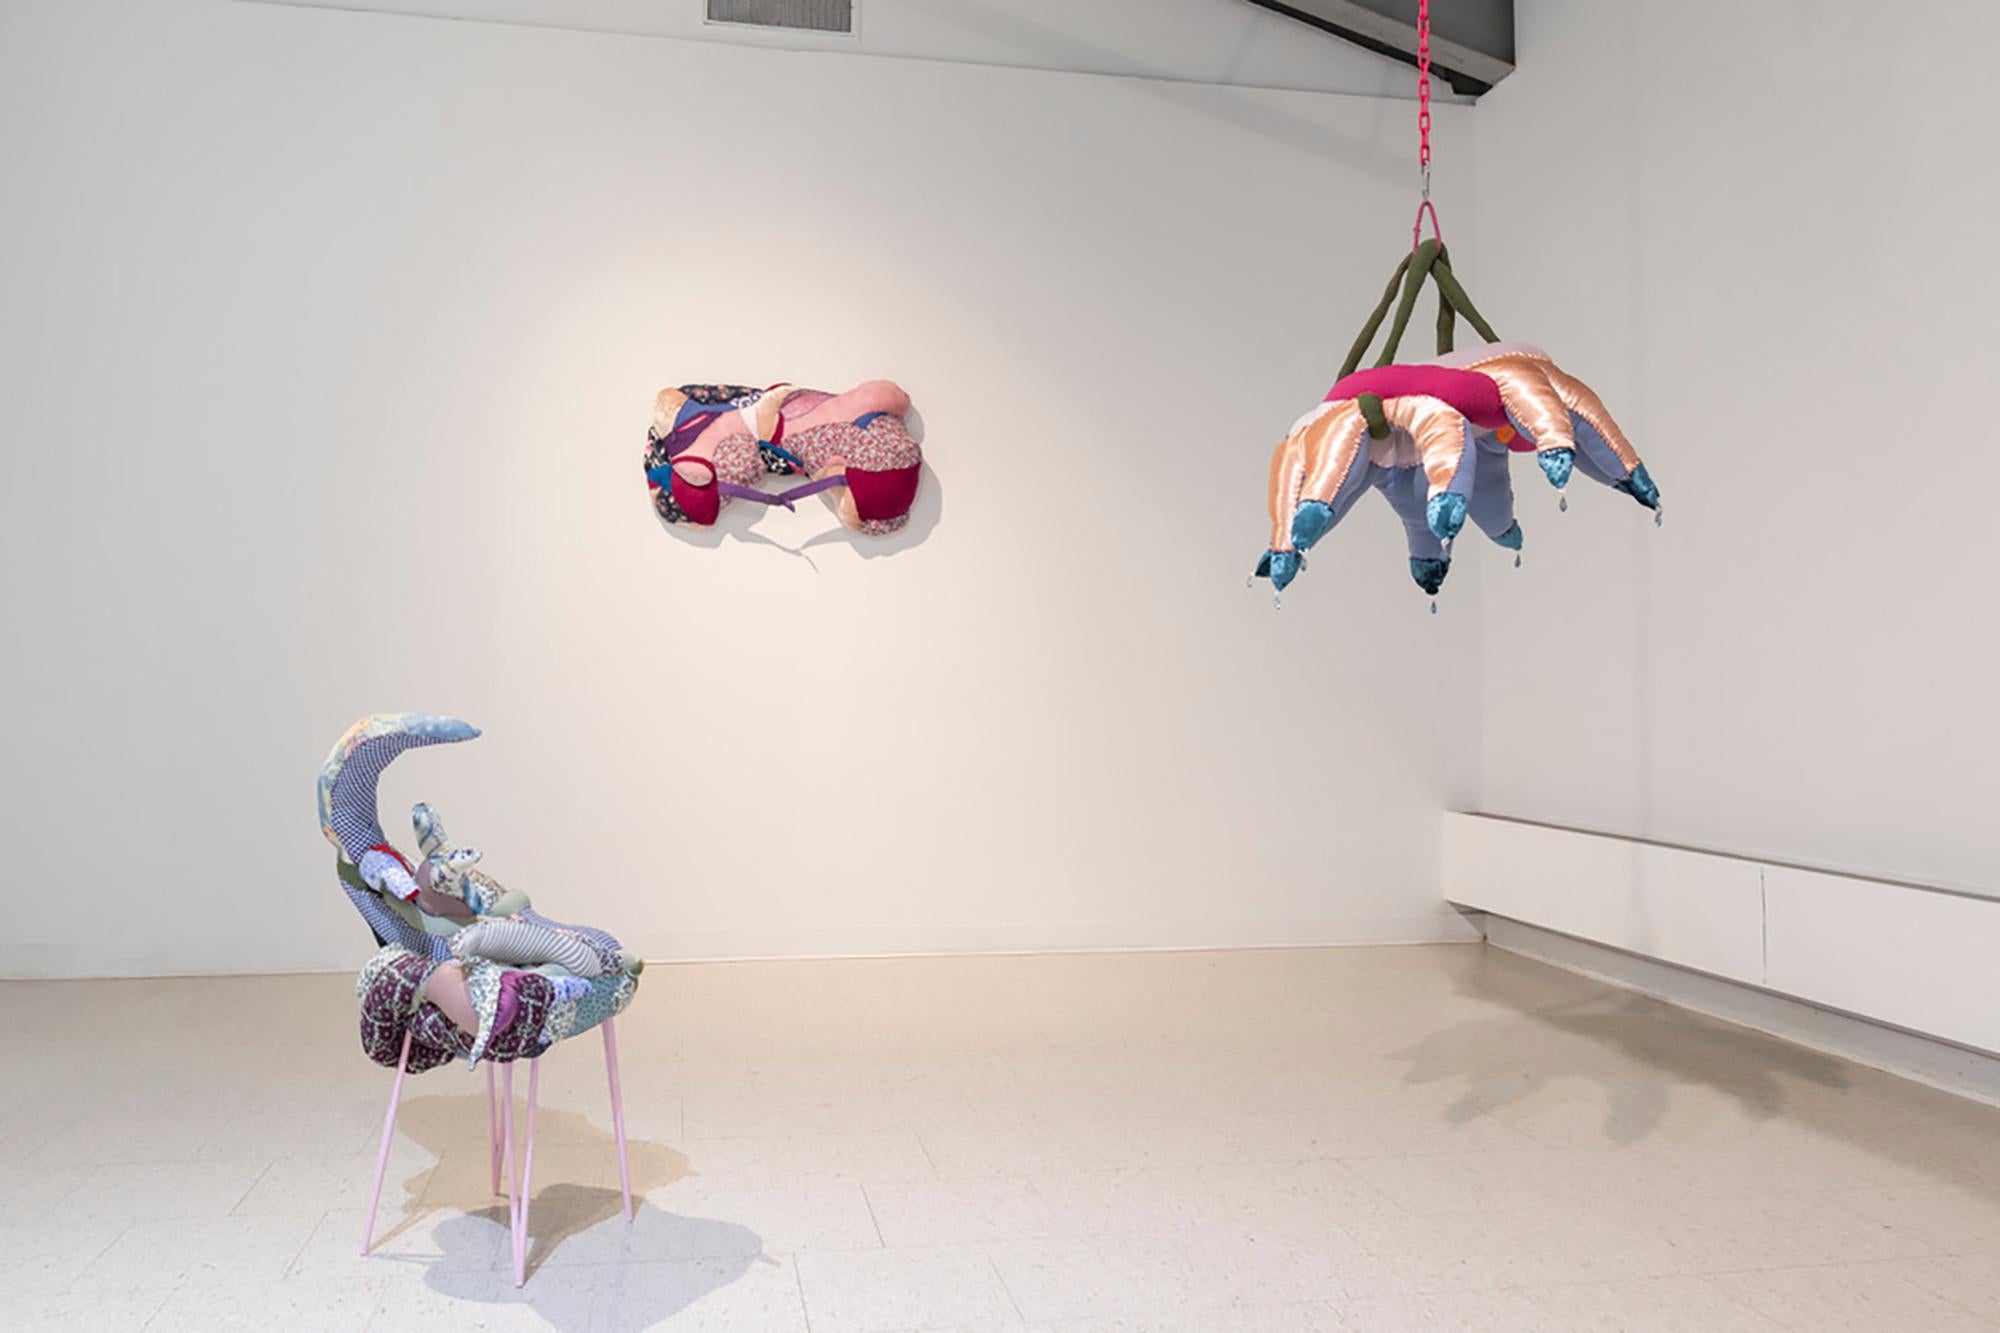 Recycled textiles, thread, batting, glazed ceramic, metal table, spray paint
34 x 22 x 18 inches

Artist Statement
I hand-sew compound sculptural forms that are constructed from clothing, furniture, household items, and other utilitarian materials.